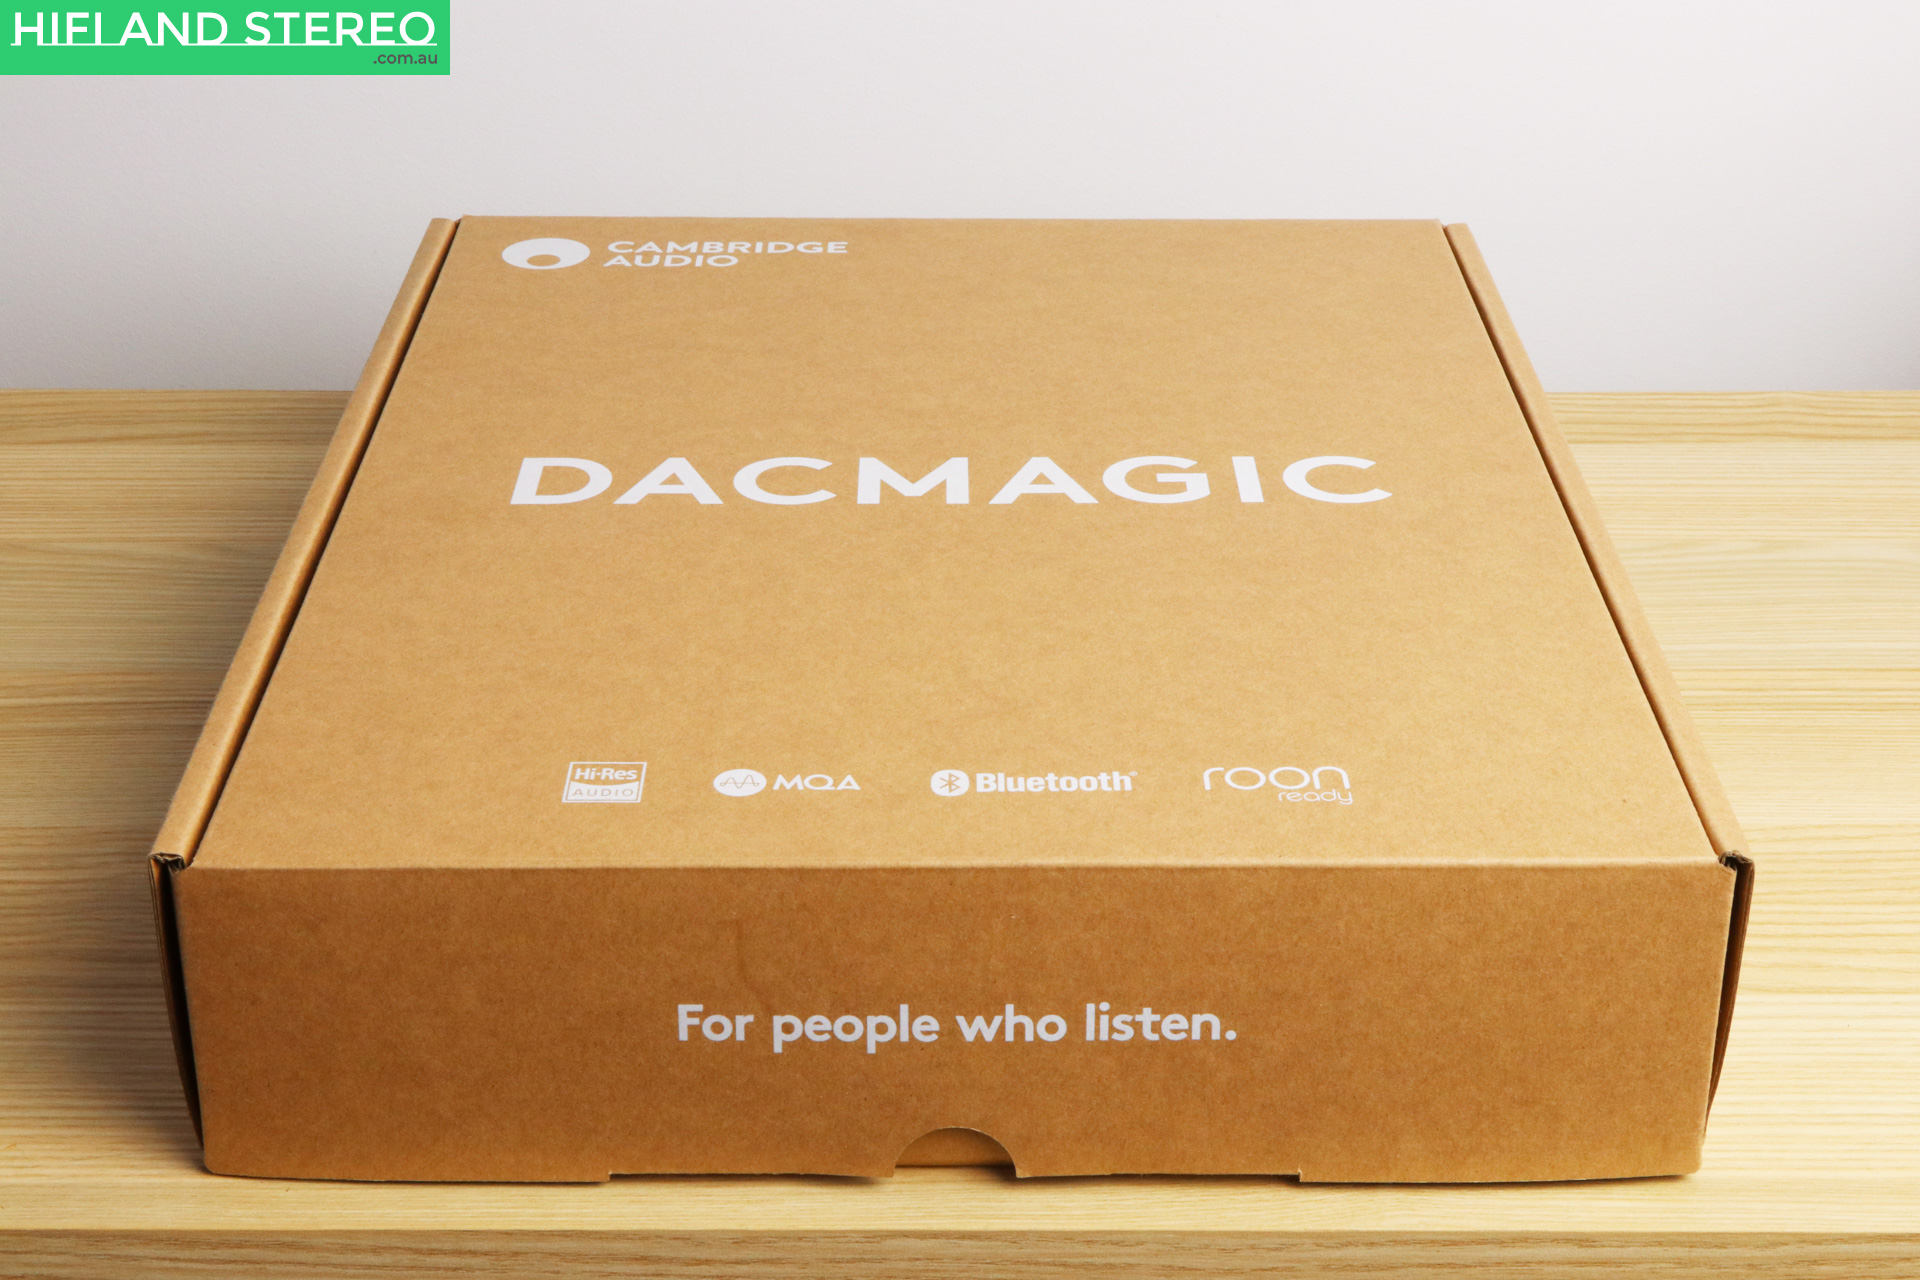 Its called a DAC 'Magic' for a reason - HiFi and Stereo